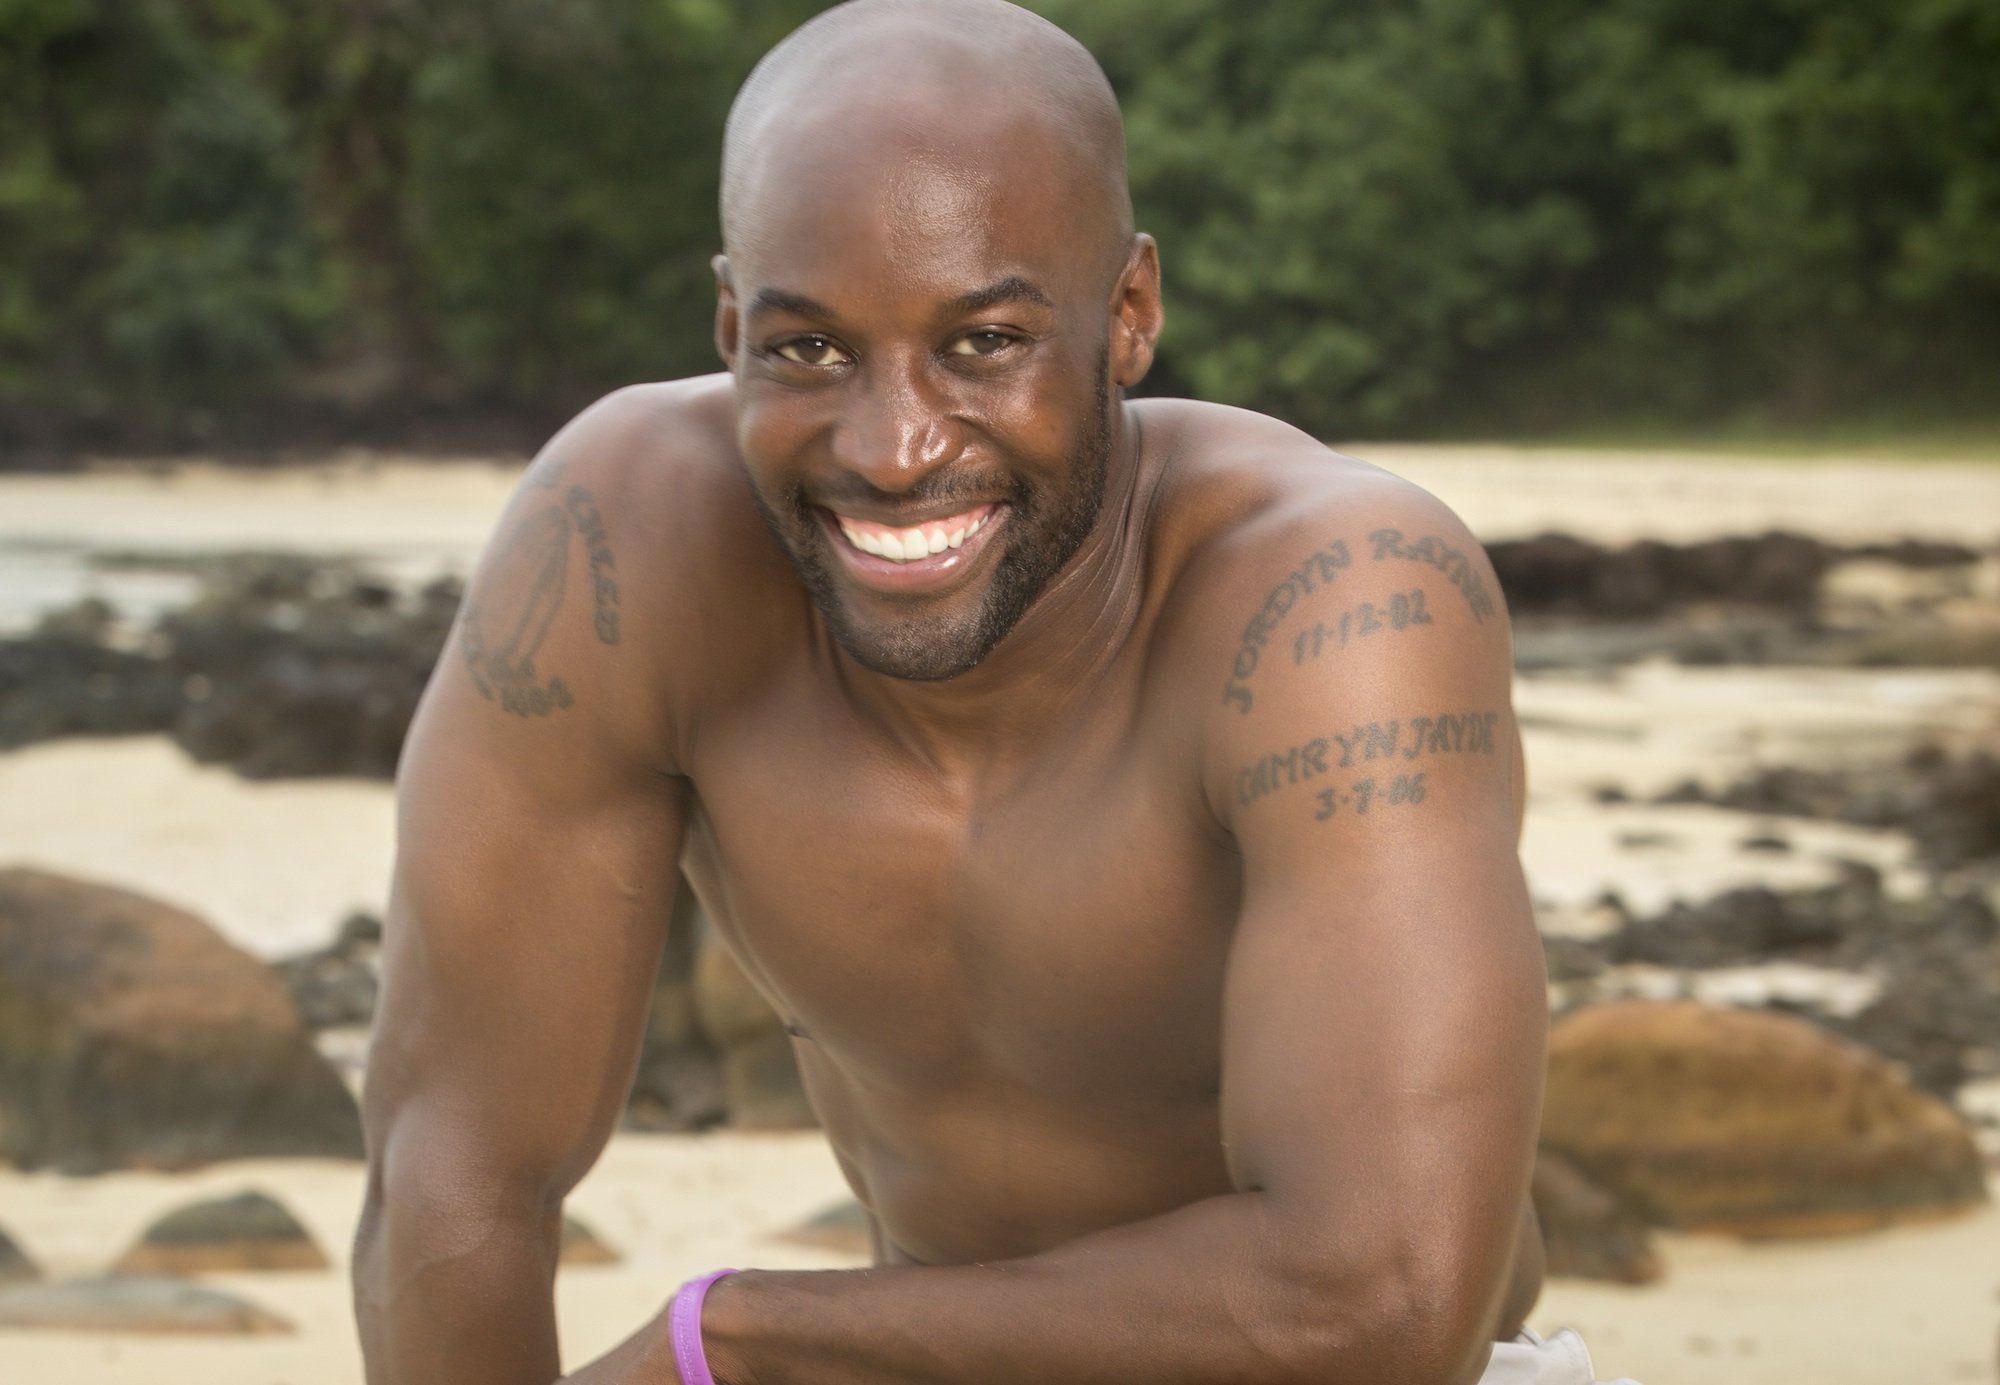 Jeremy Collins Second Chance On Survivor Pays Off In History